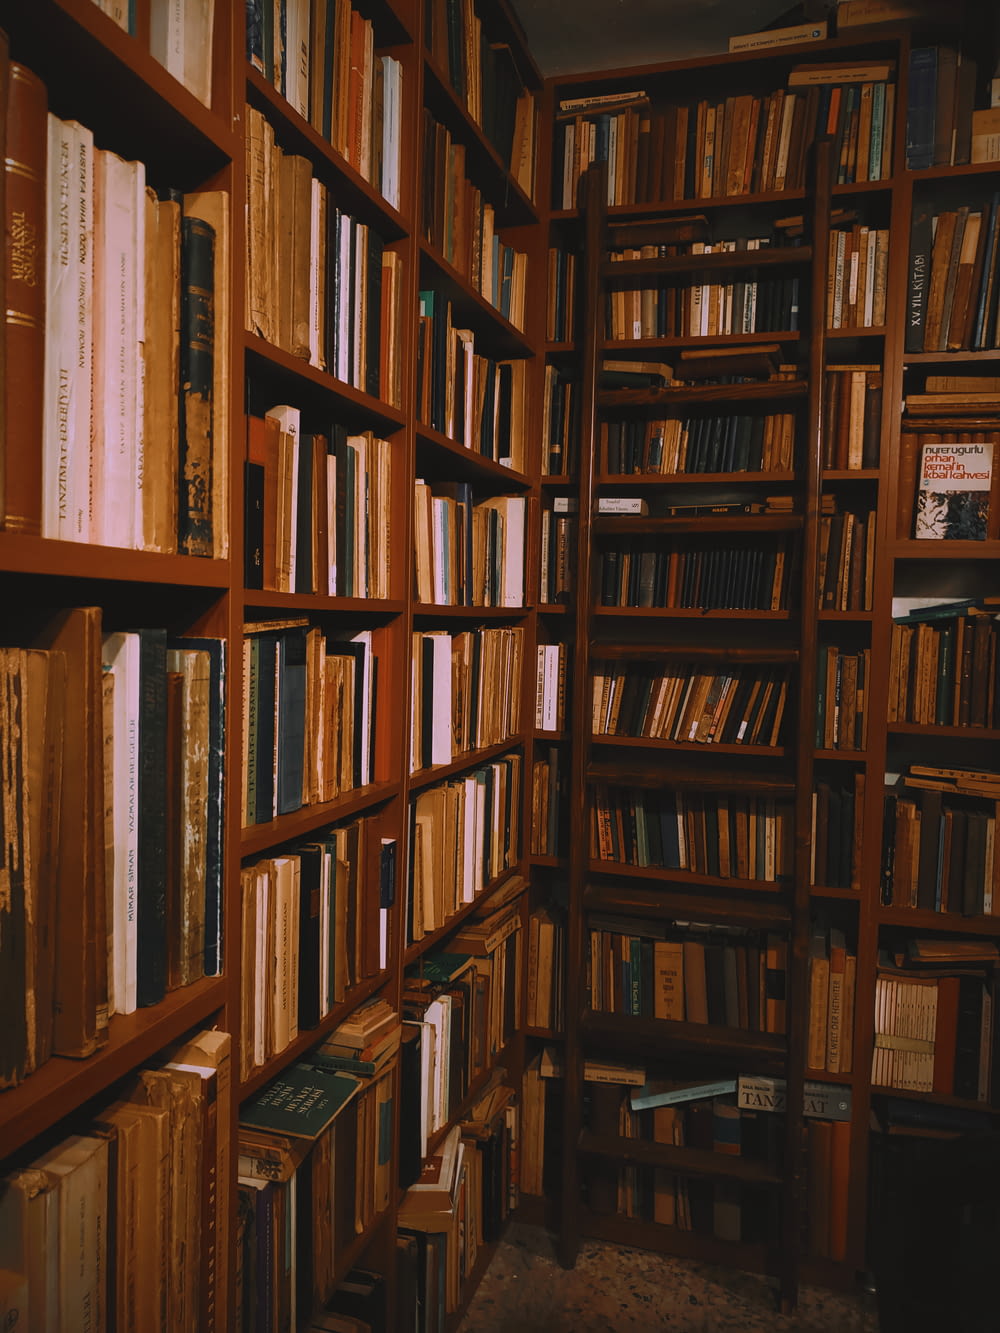 books stacked on wooden shelves in a library